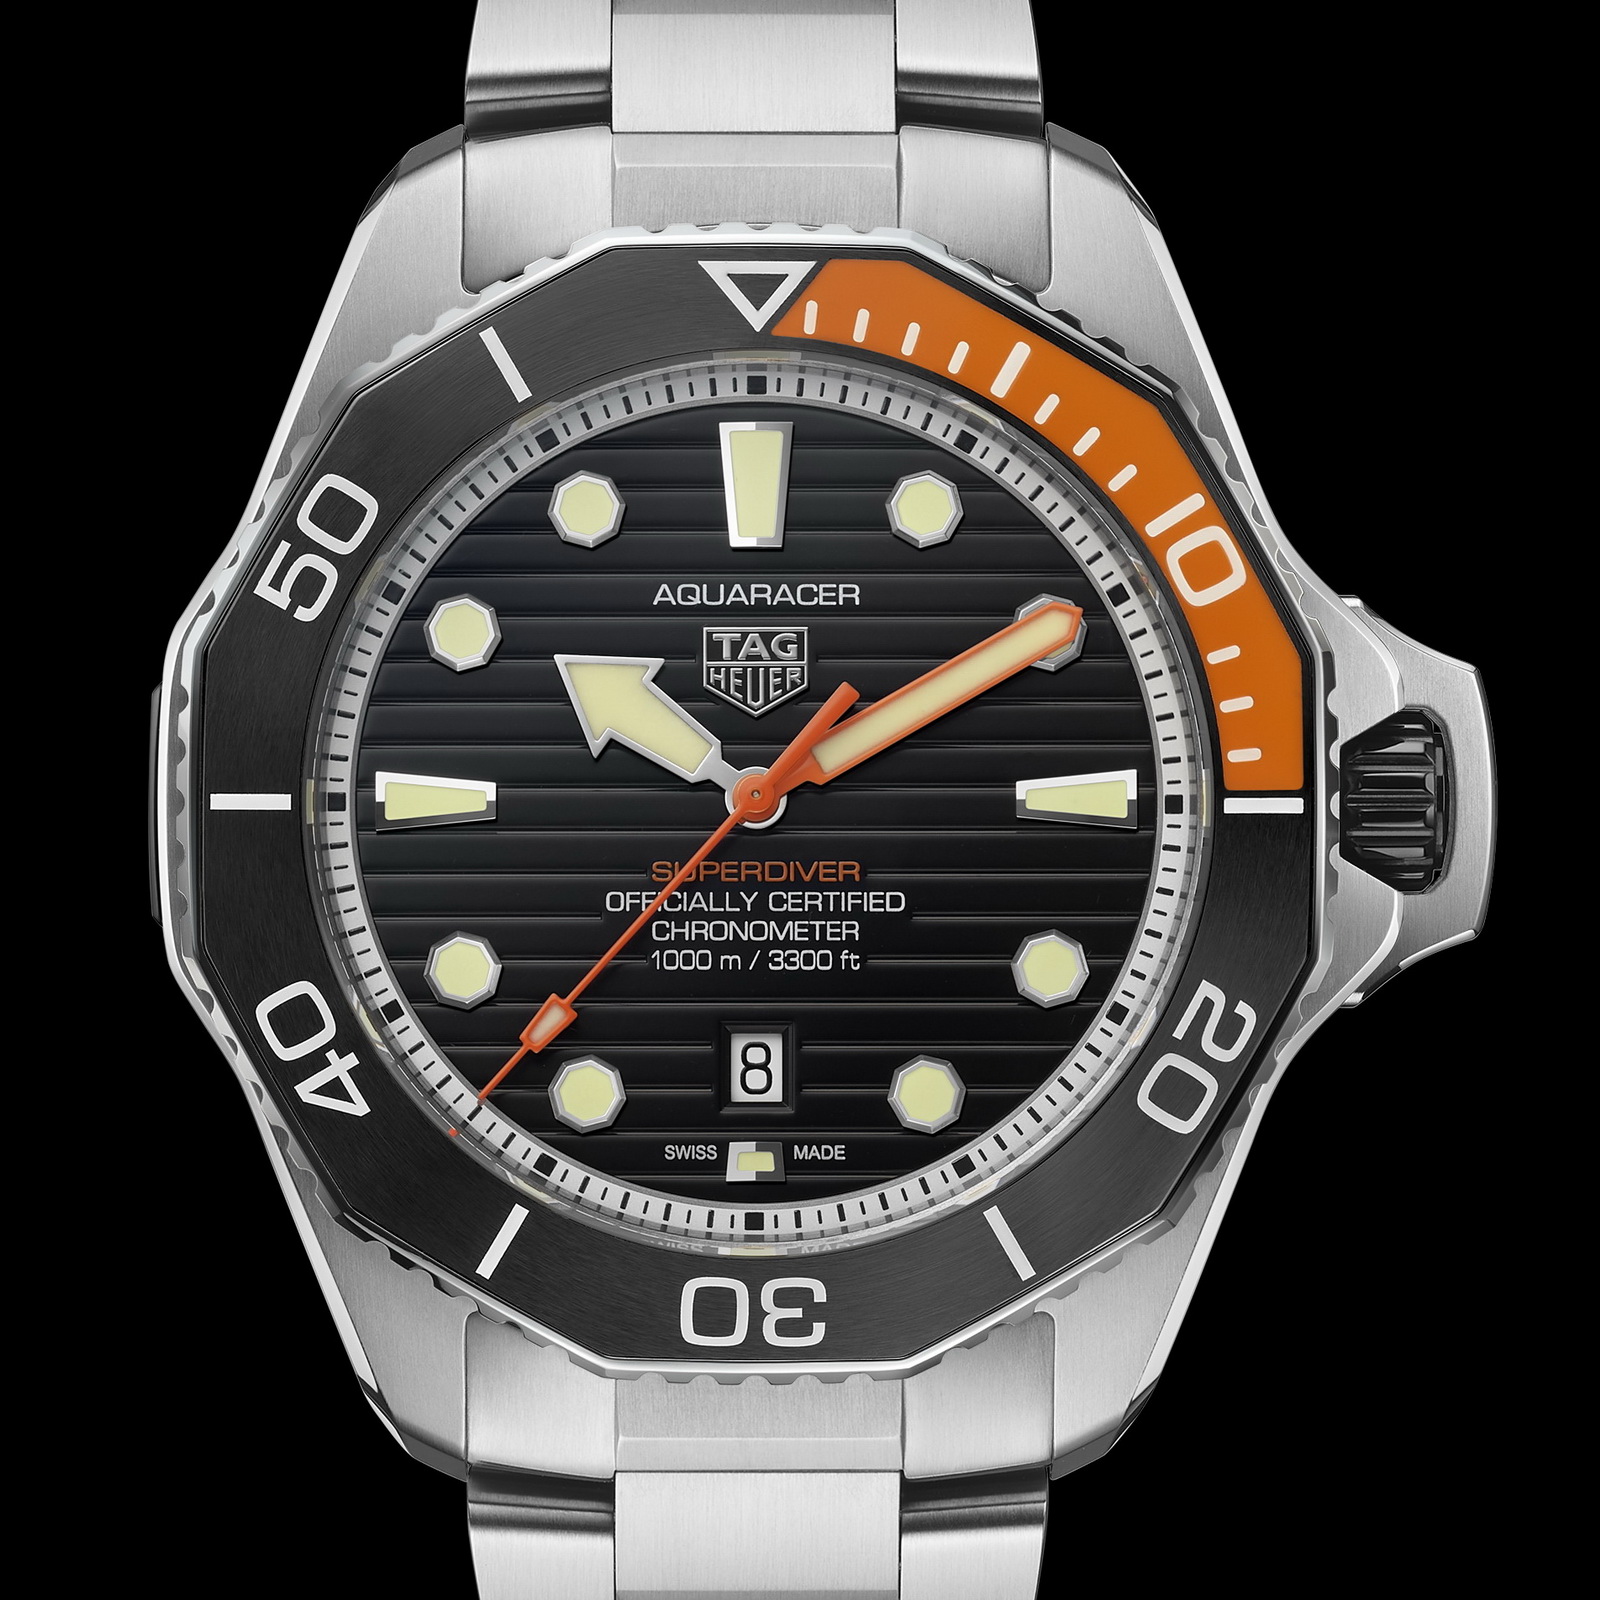 Five for the Dive – A History of Heuer's Deep Dive Watches